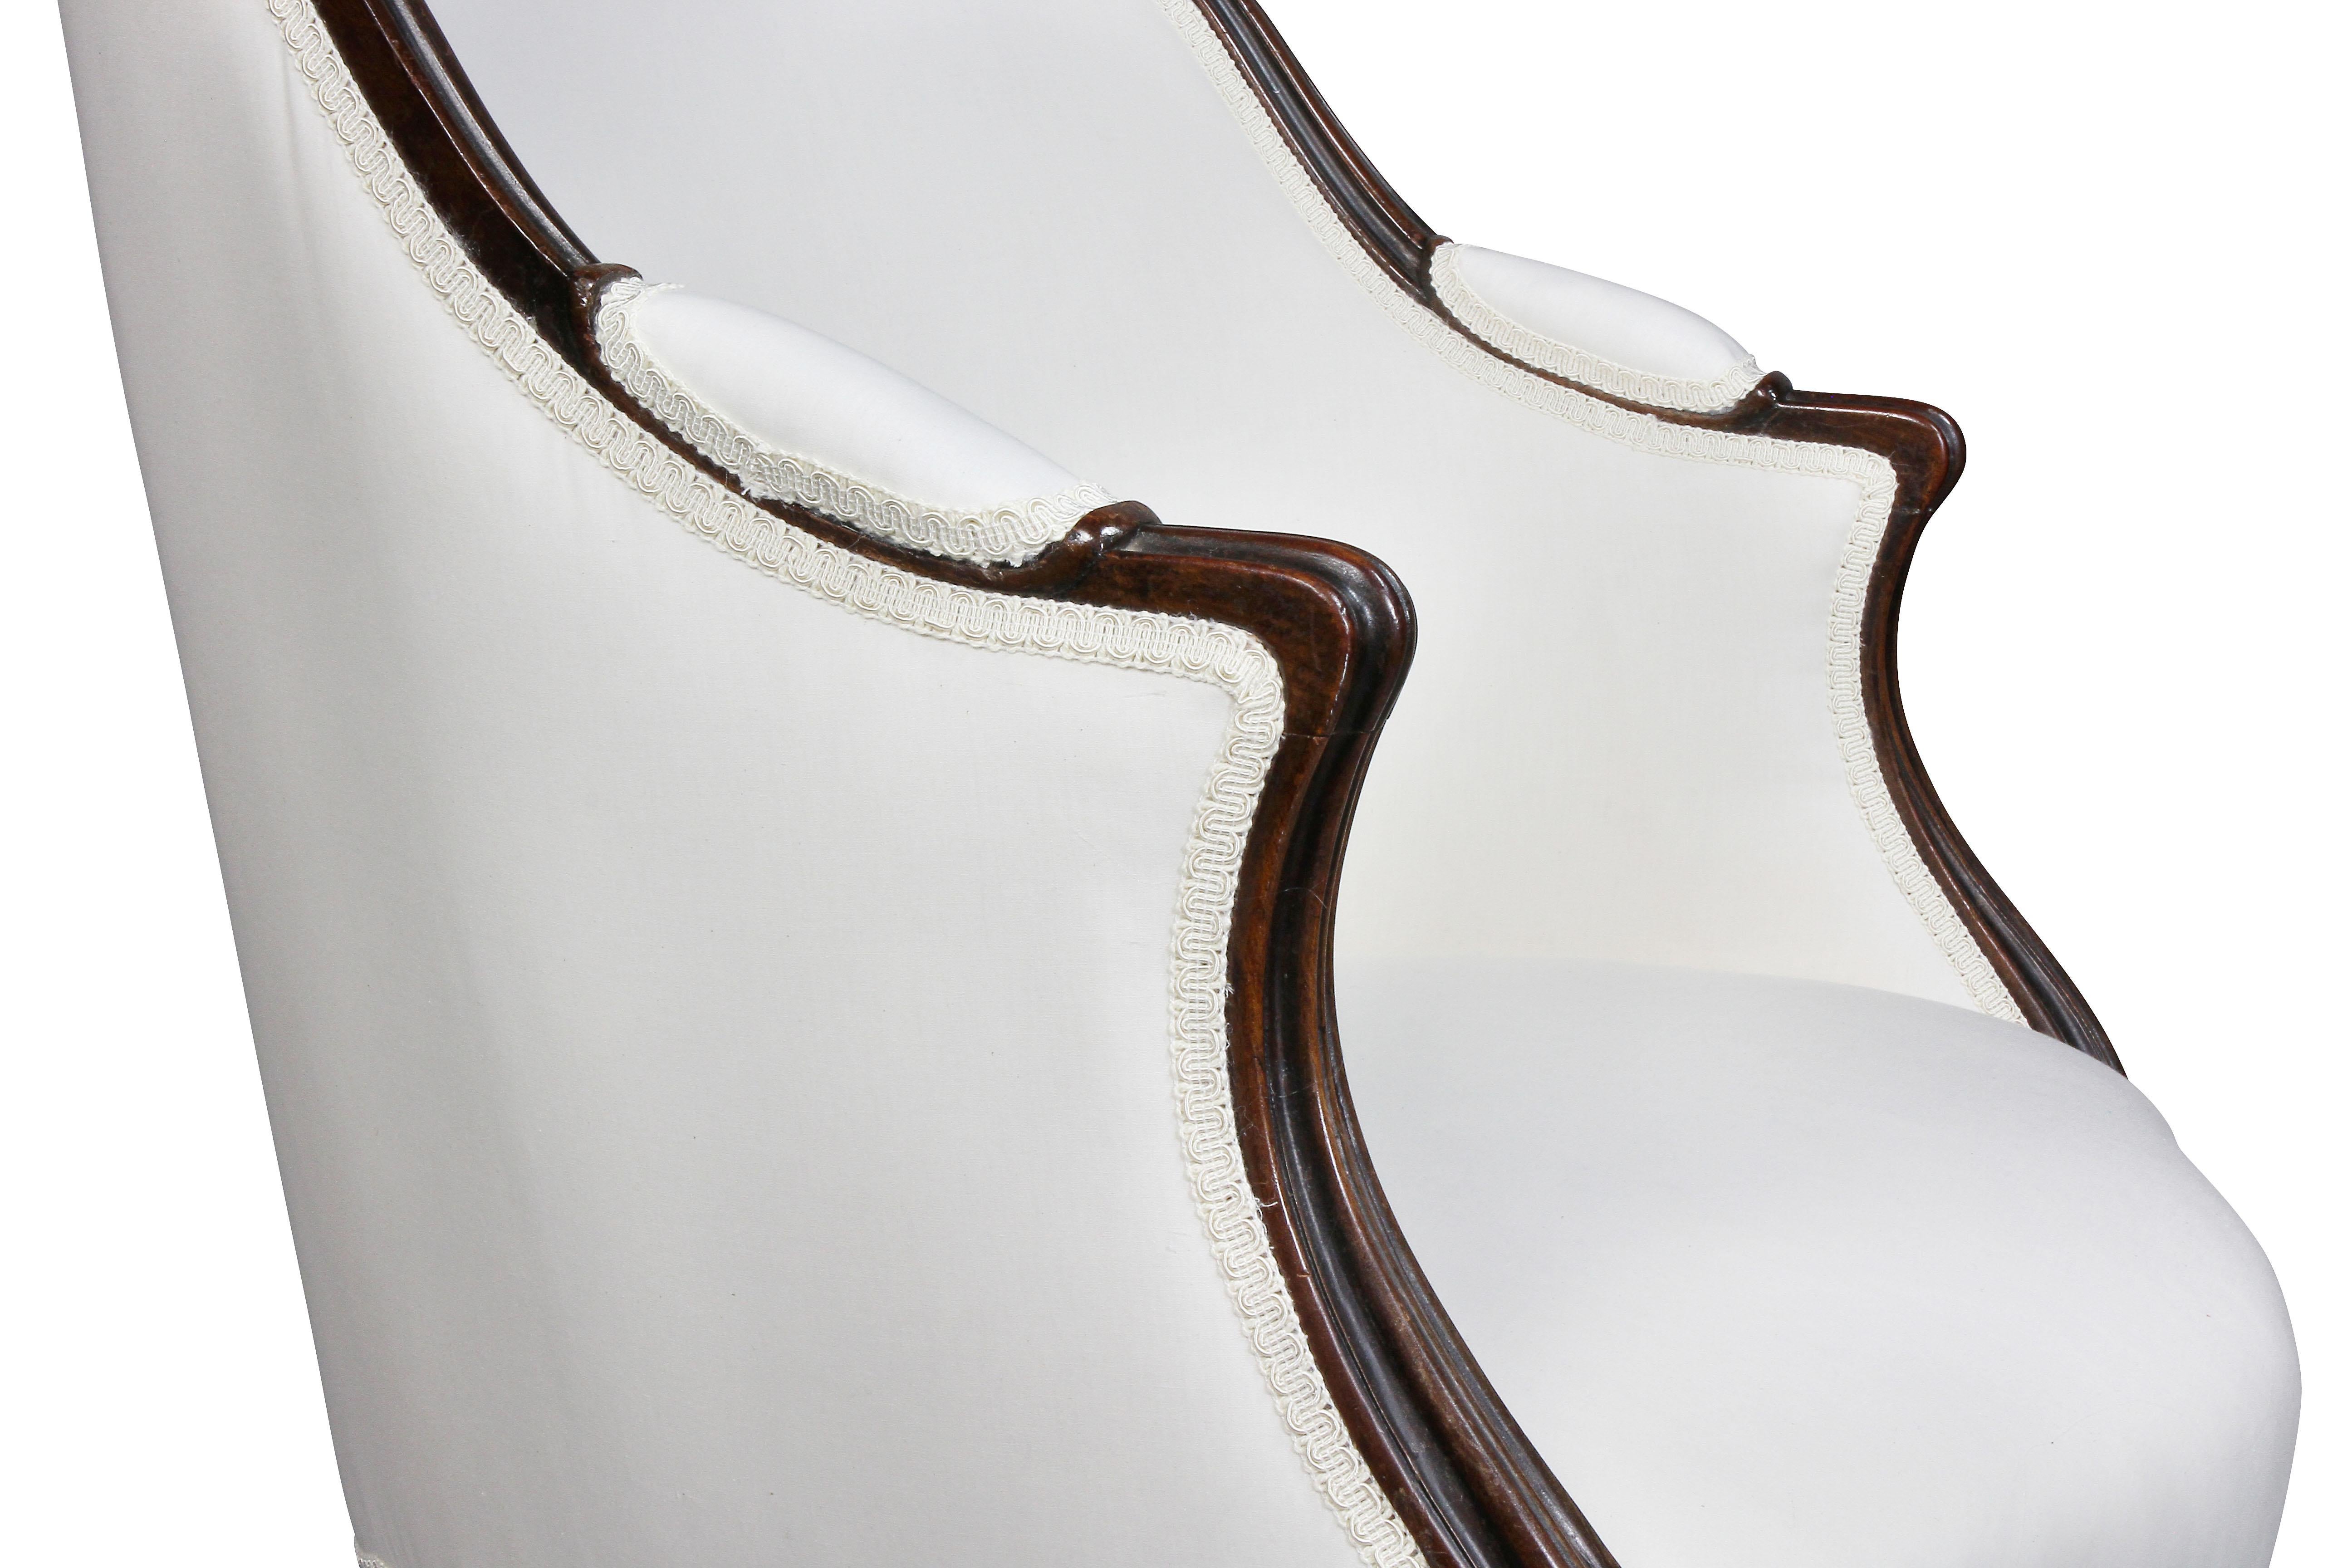 With arched upholstered back set in a nicely molded and carved frame, serpentine upholstered seat, raised on French style cabriole legs. Provenance, Harvard Art Museums. Newly upholstered with muslin.